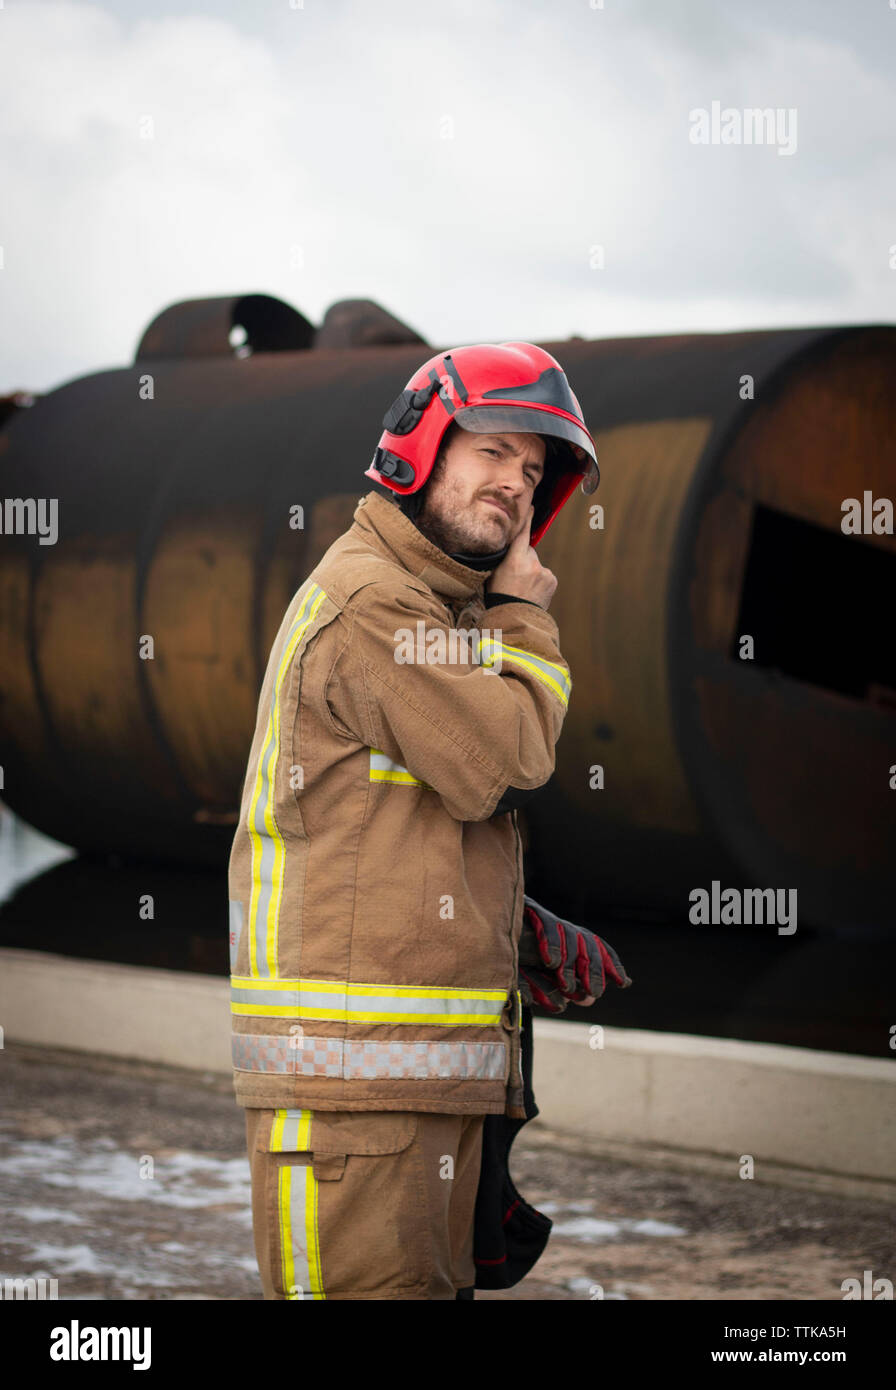 Fireman suiting up to work for the day Stock Photo